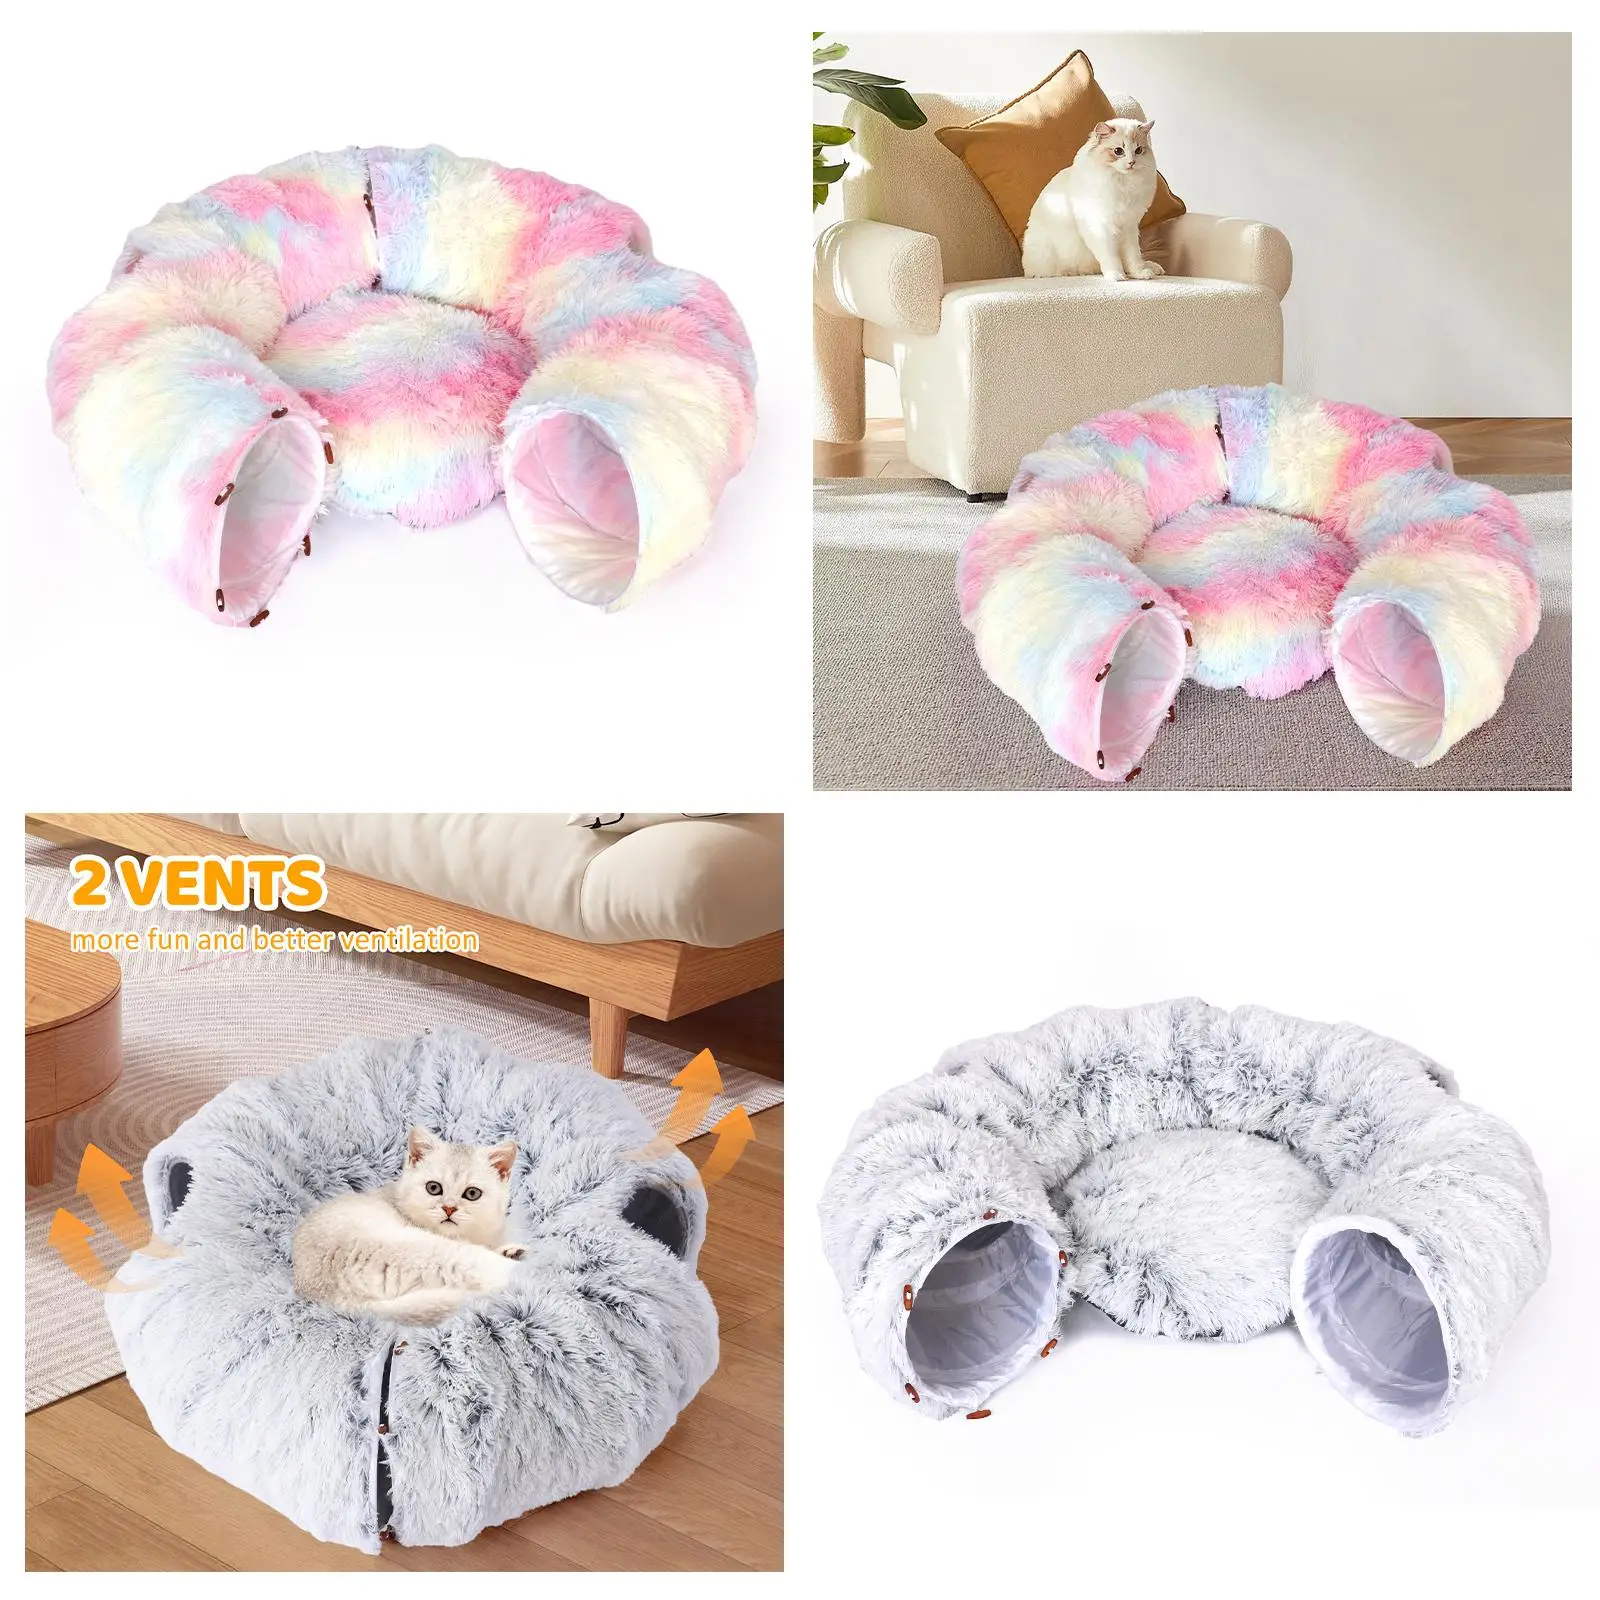 Cat Tunnel Cat Toy Collapsible Portable with Hanging Ball Warm Soft Pet Cat Bed for Rabbit Bunny Kitten Small Animals Ferret